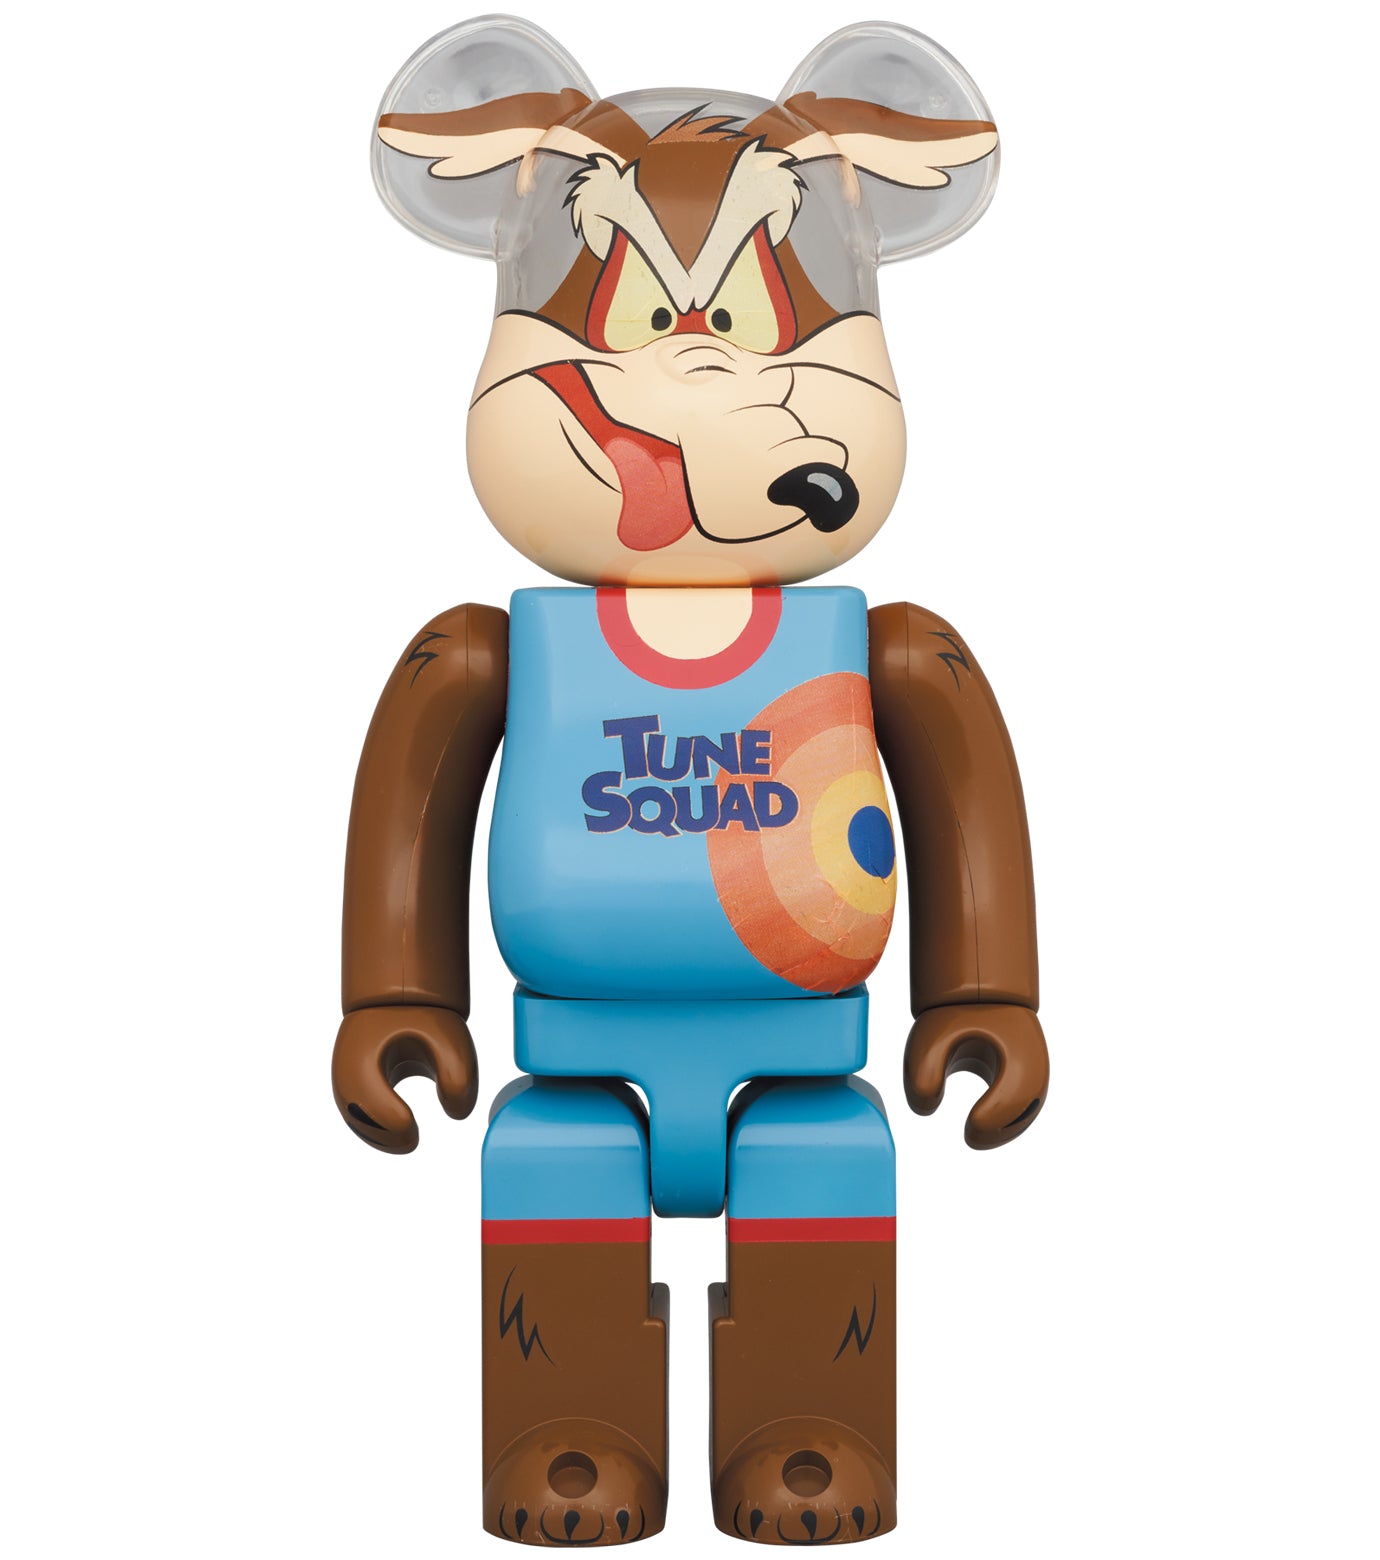 BE＠RBRICK WILE E. COYOTE 1000％